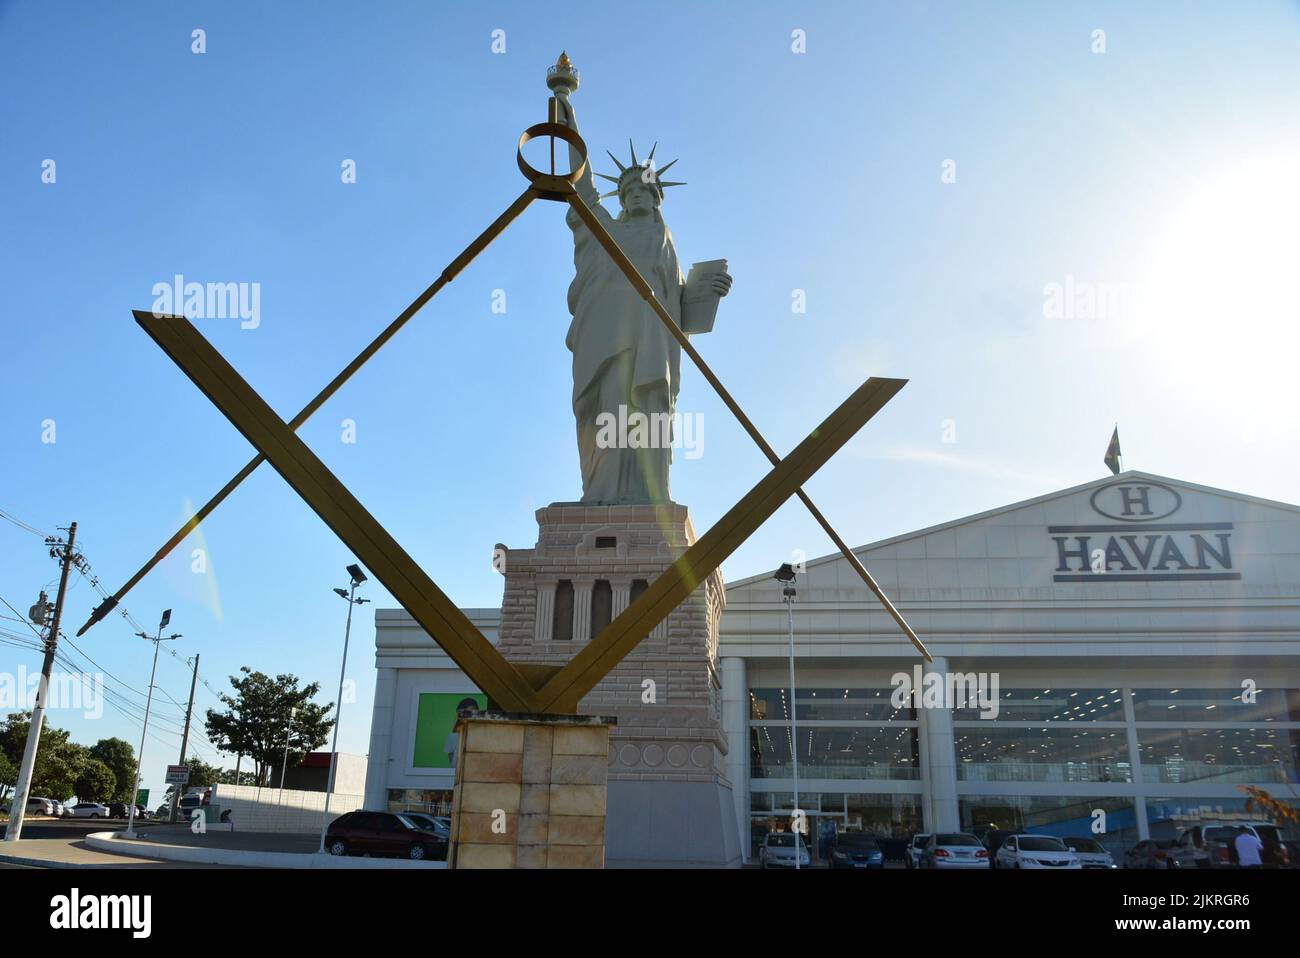 Landmark commemorating the masonic lodge in the foreground and imitation of the Statue of Liberty, on a concrete plinth, dusk, Brazil, South America, Stock Photo